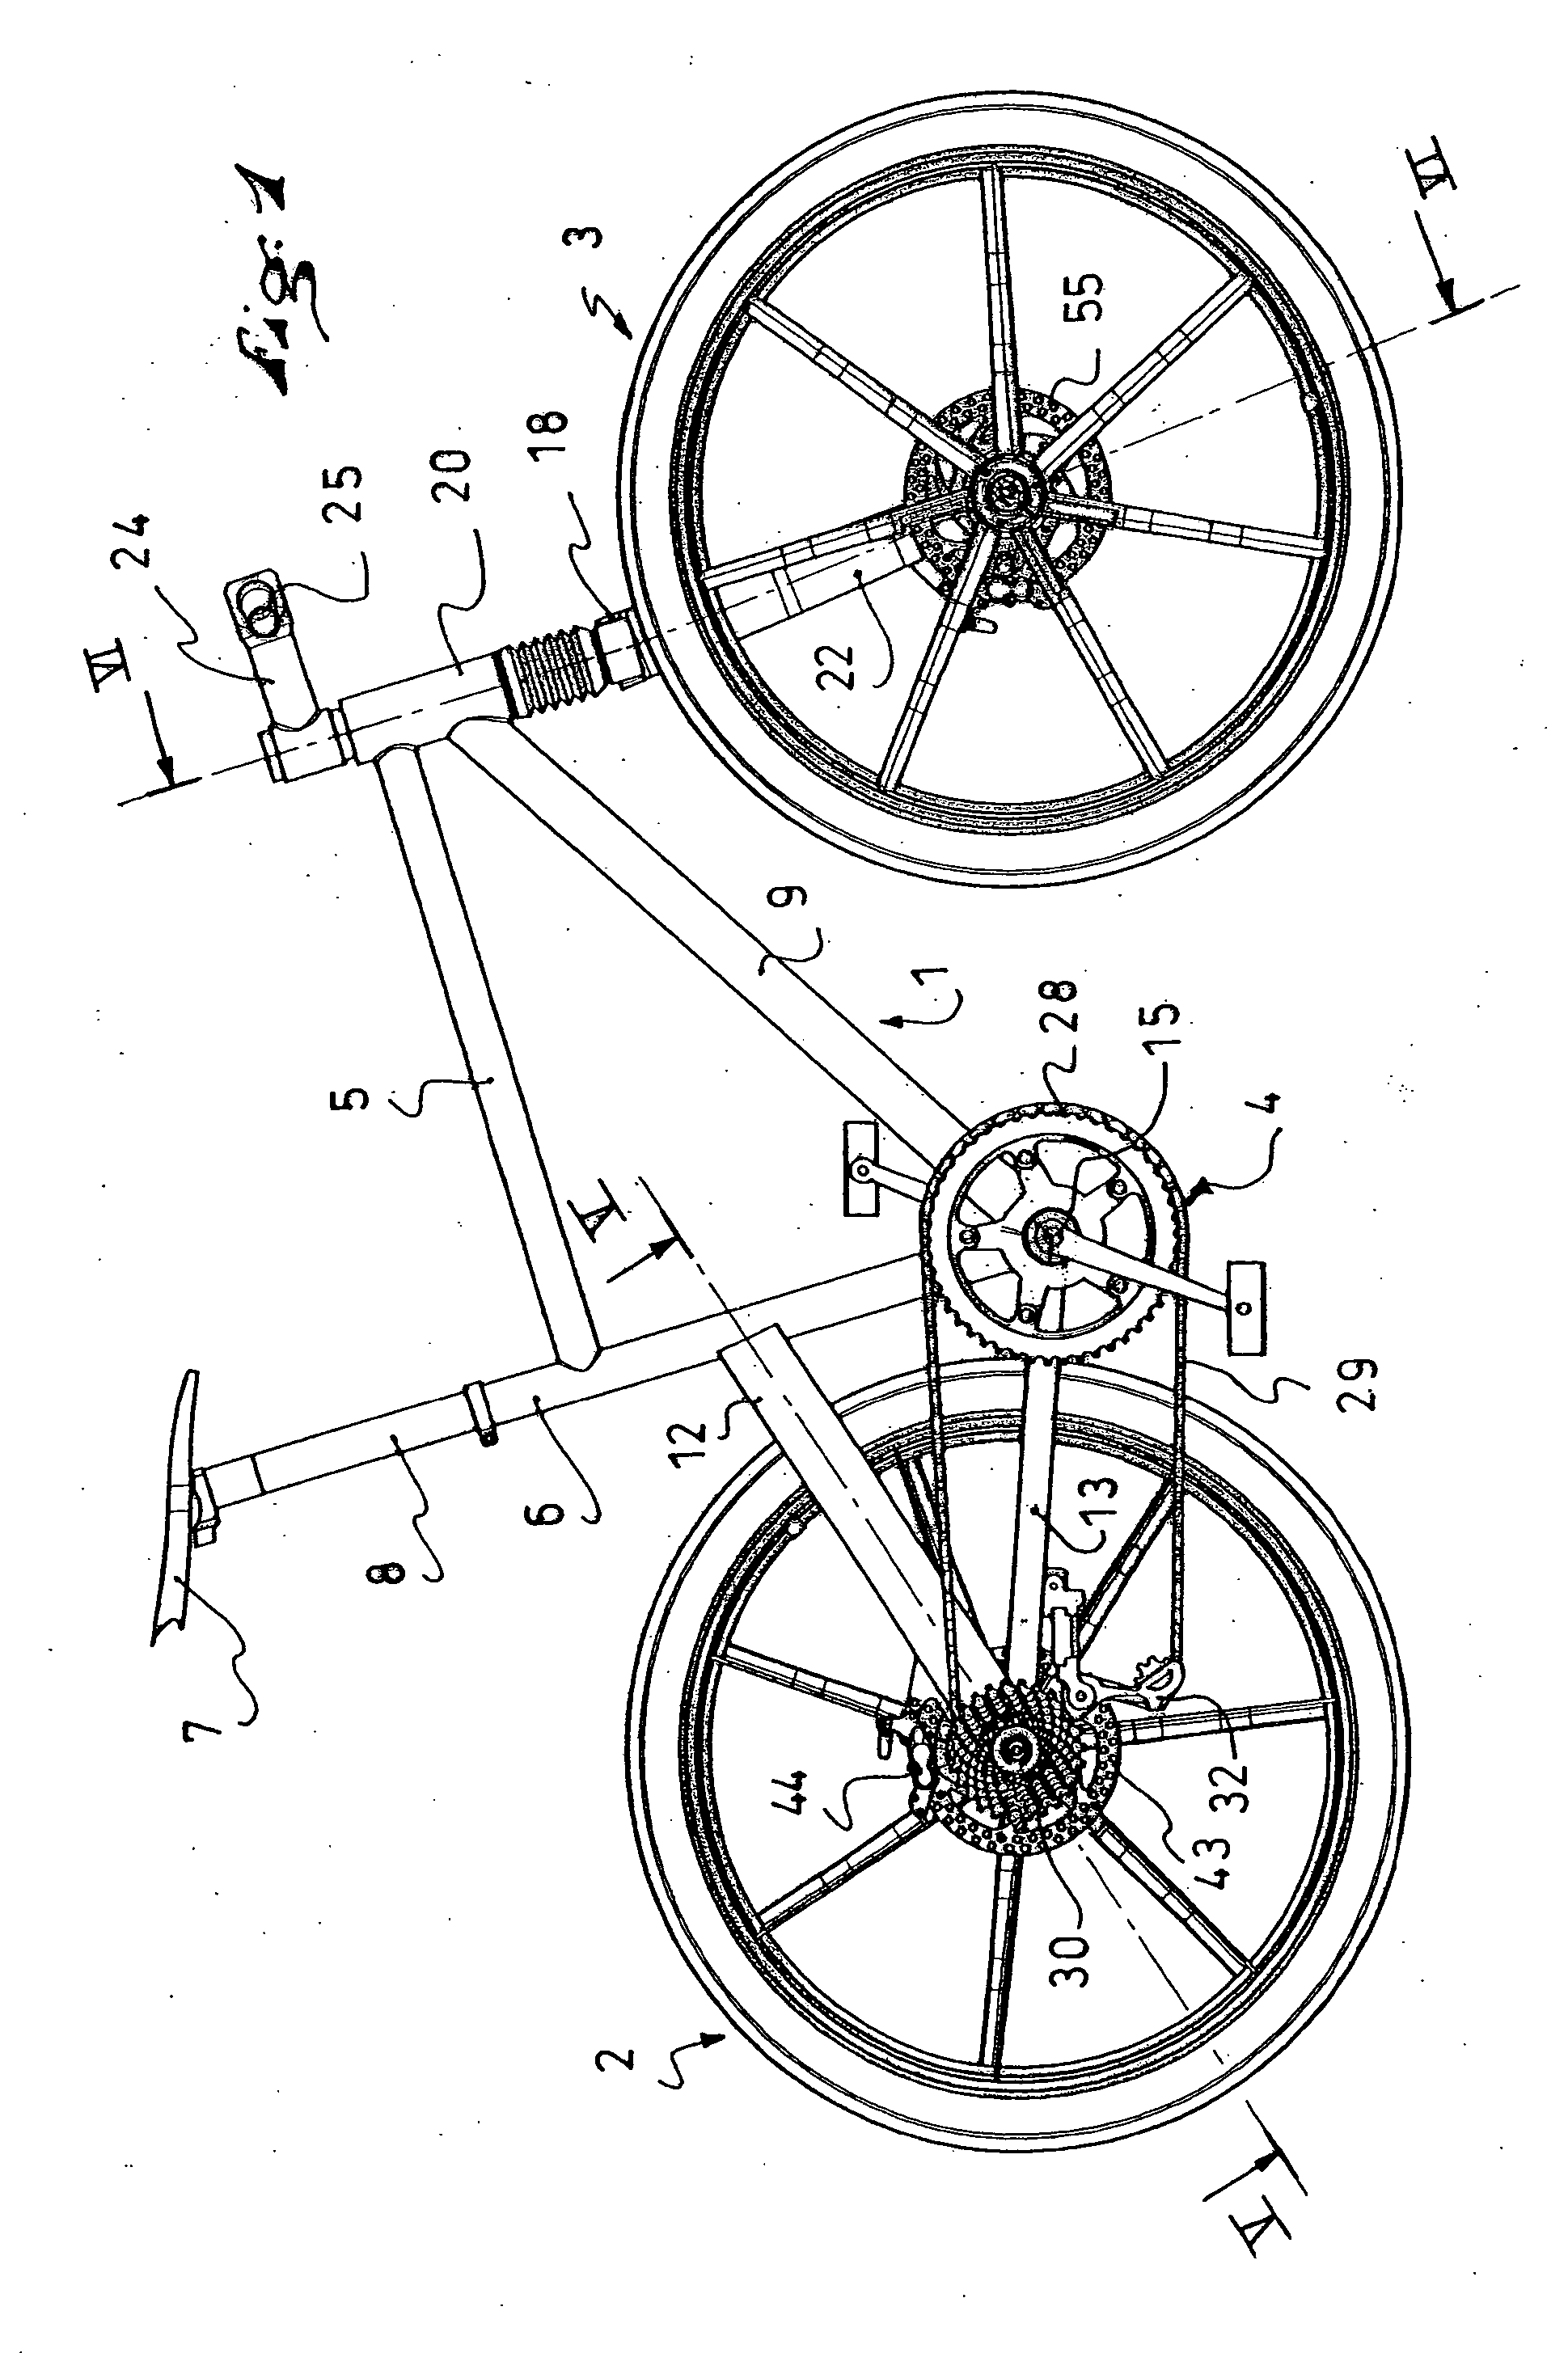 Wheel and a bicycle equipped with such wheel